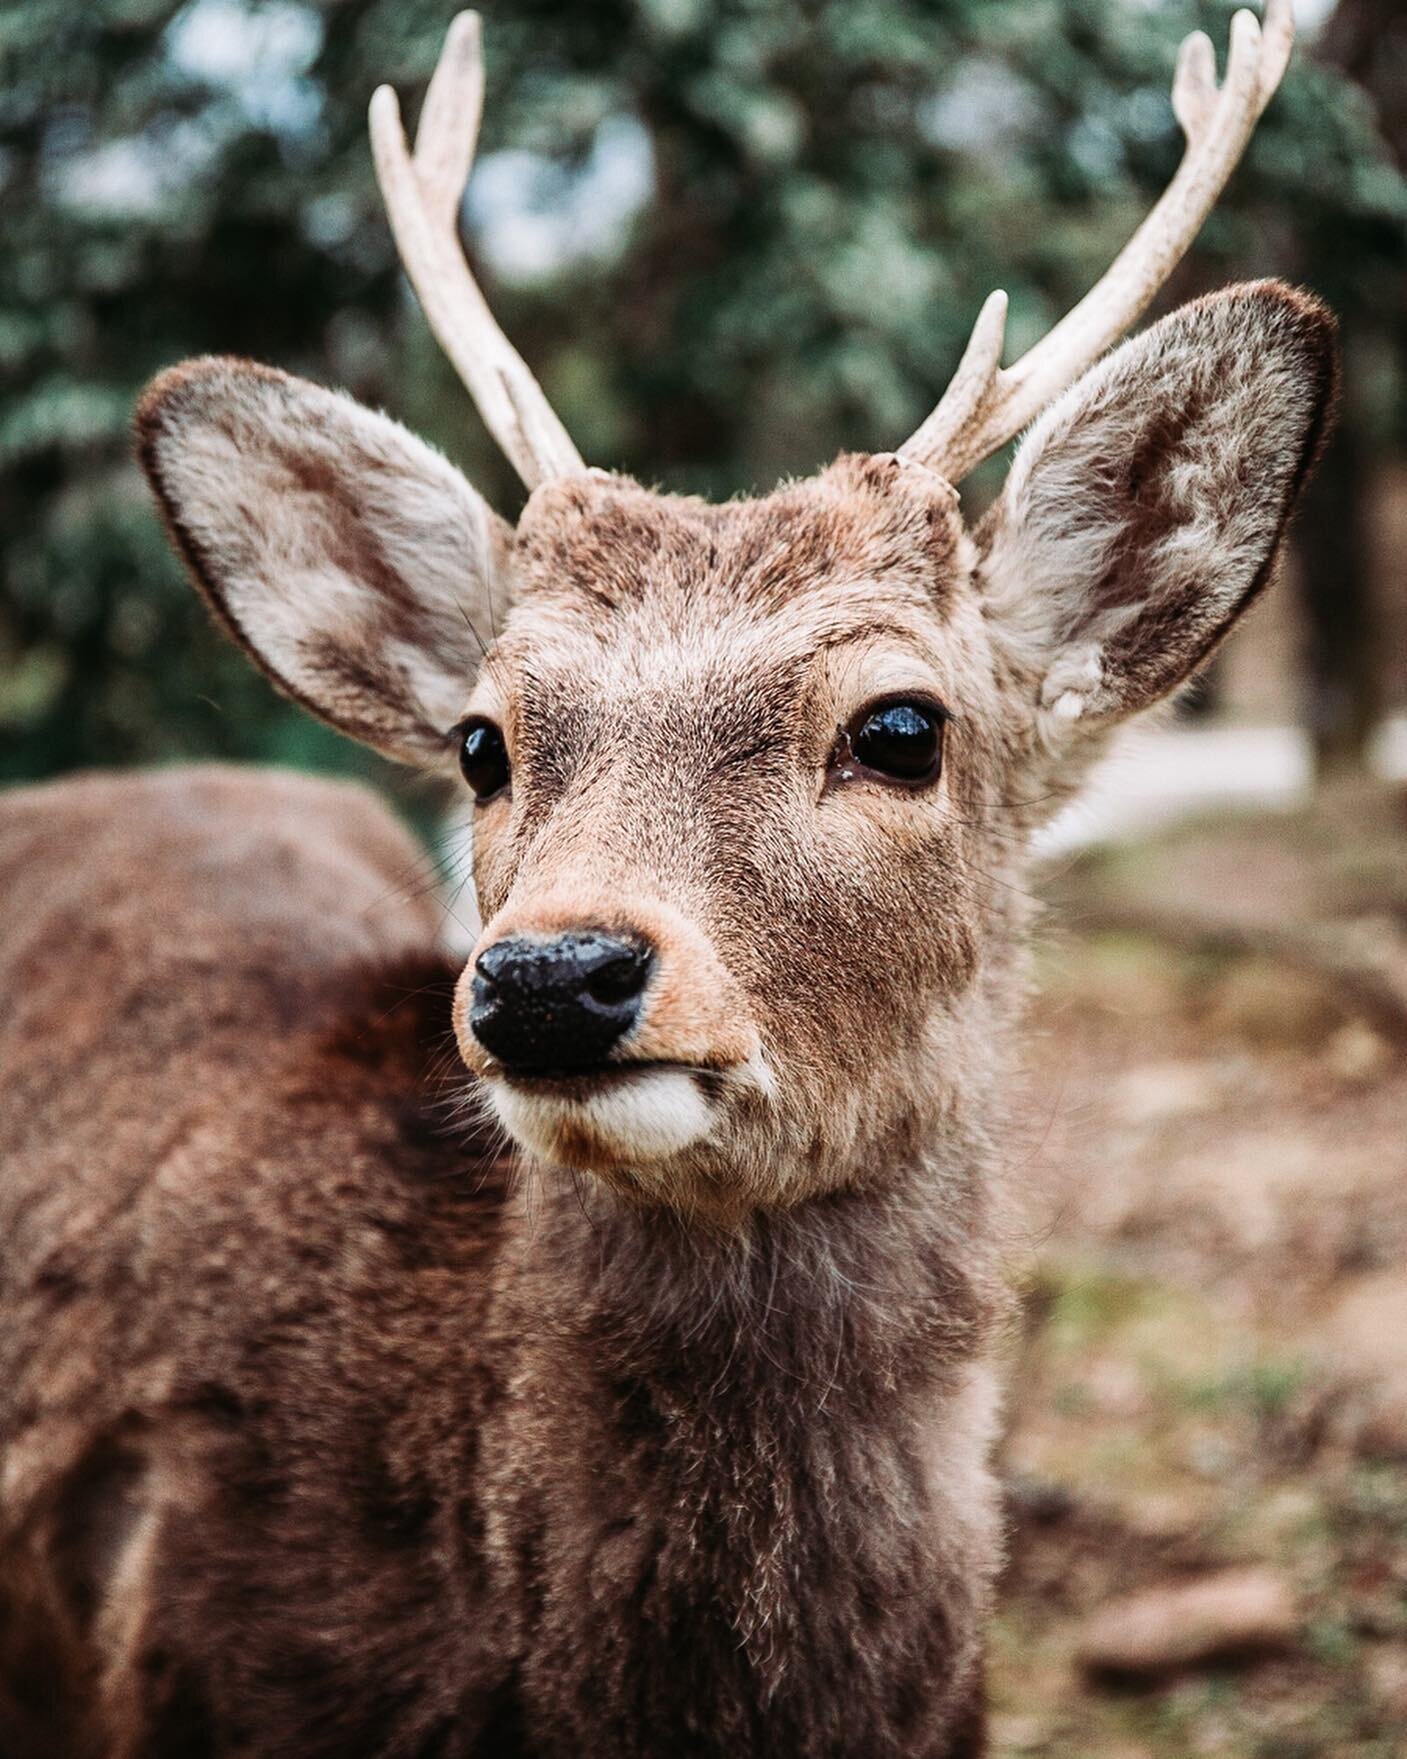 If I had to photograph one place for the rest of my life it would have to be Nara park 🦌 Then again I feel like I&rsquo;m constantly saying that new places I visit are my favourite 😂 I should settle with the fact that I just love Japan! What&rsquo;